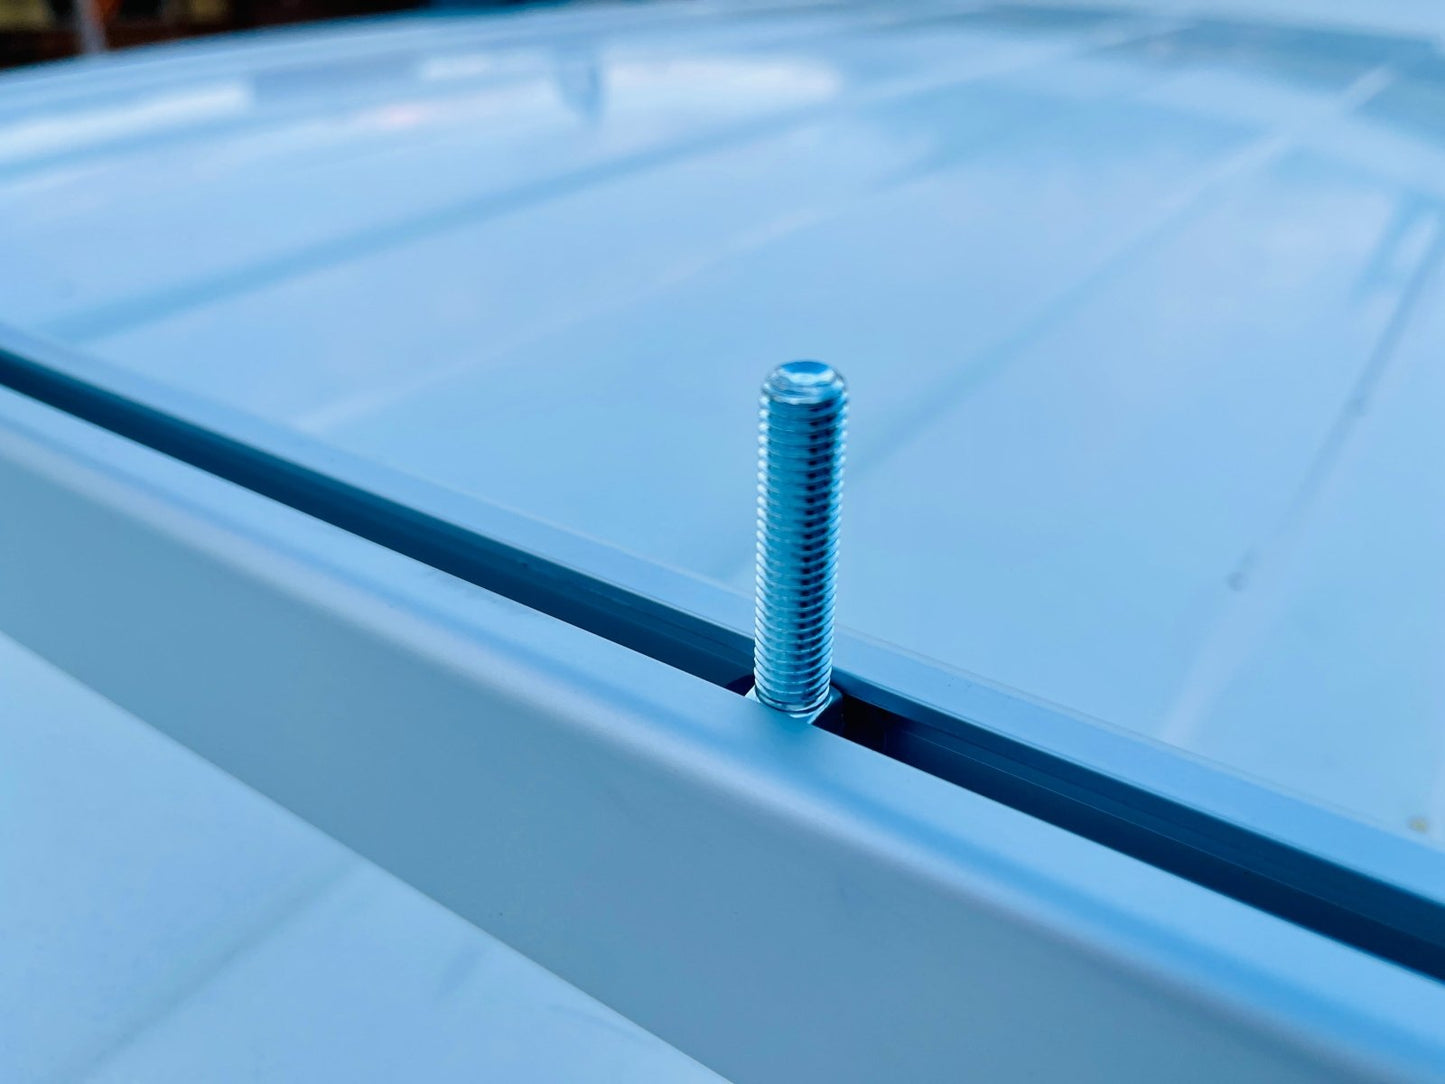 van roof rack with t-slot inside the cross bar with carriage bolt for mounting